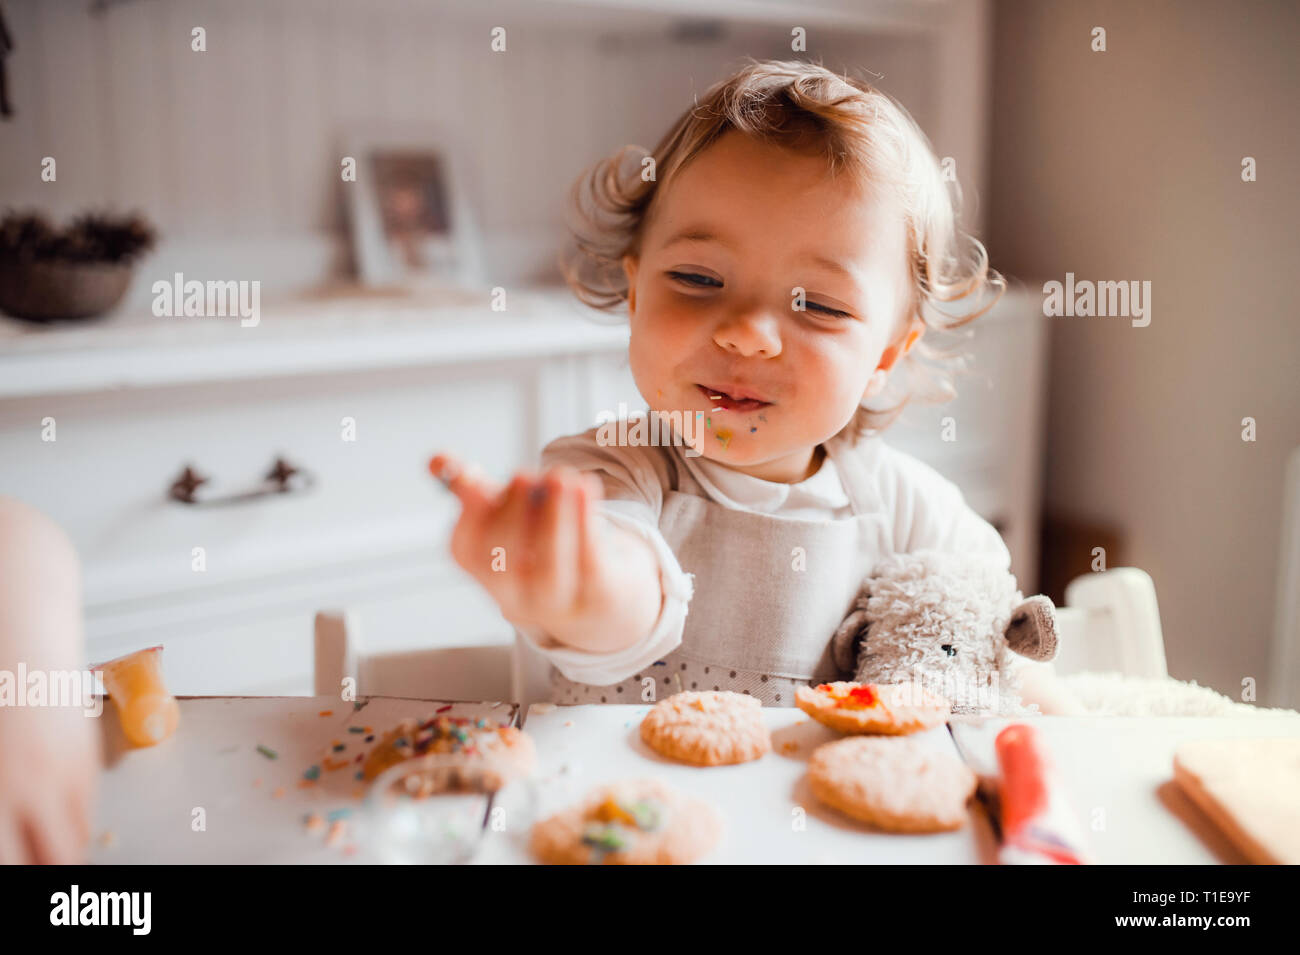 A small toddler girl sitting at the table, decorating cakes at home. Stock Photo